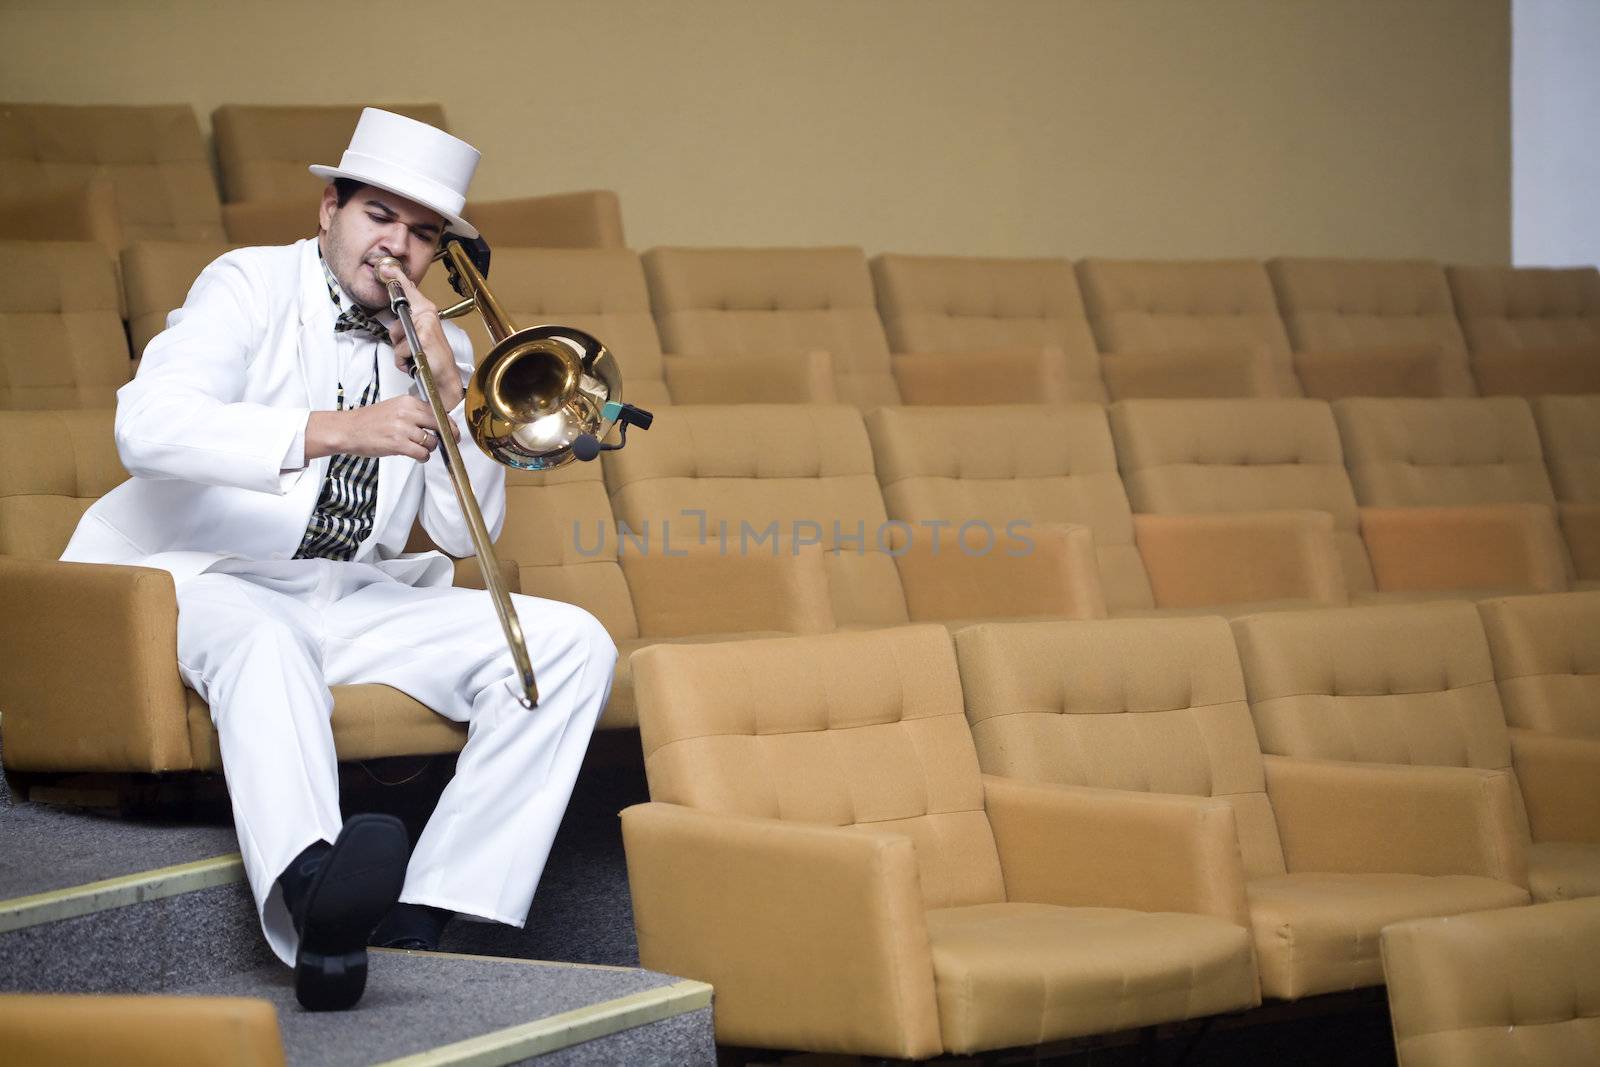 A trombonist in a white suit and yellow background.